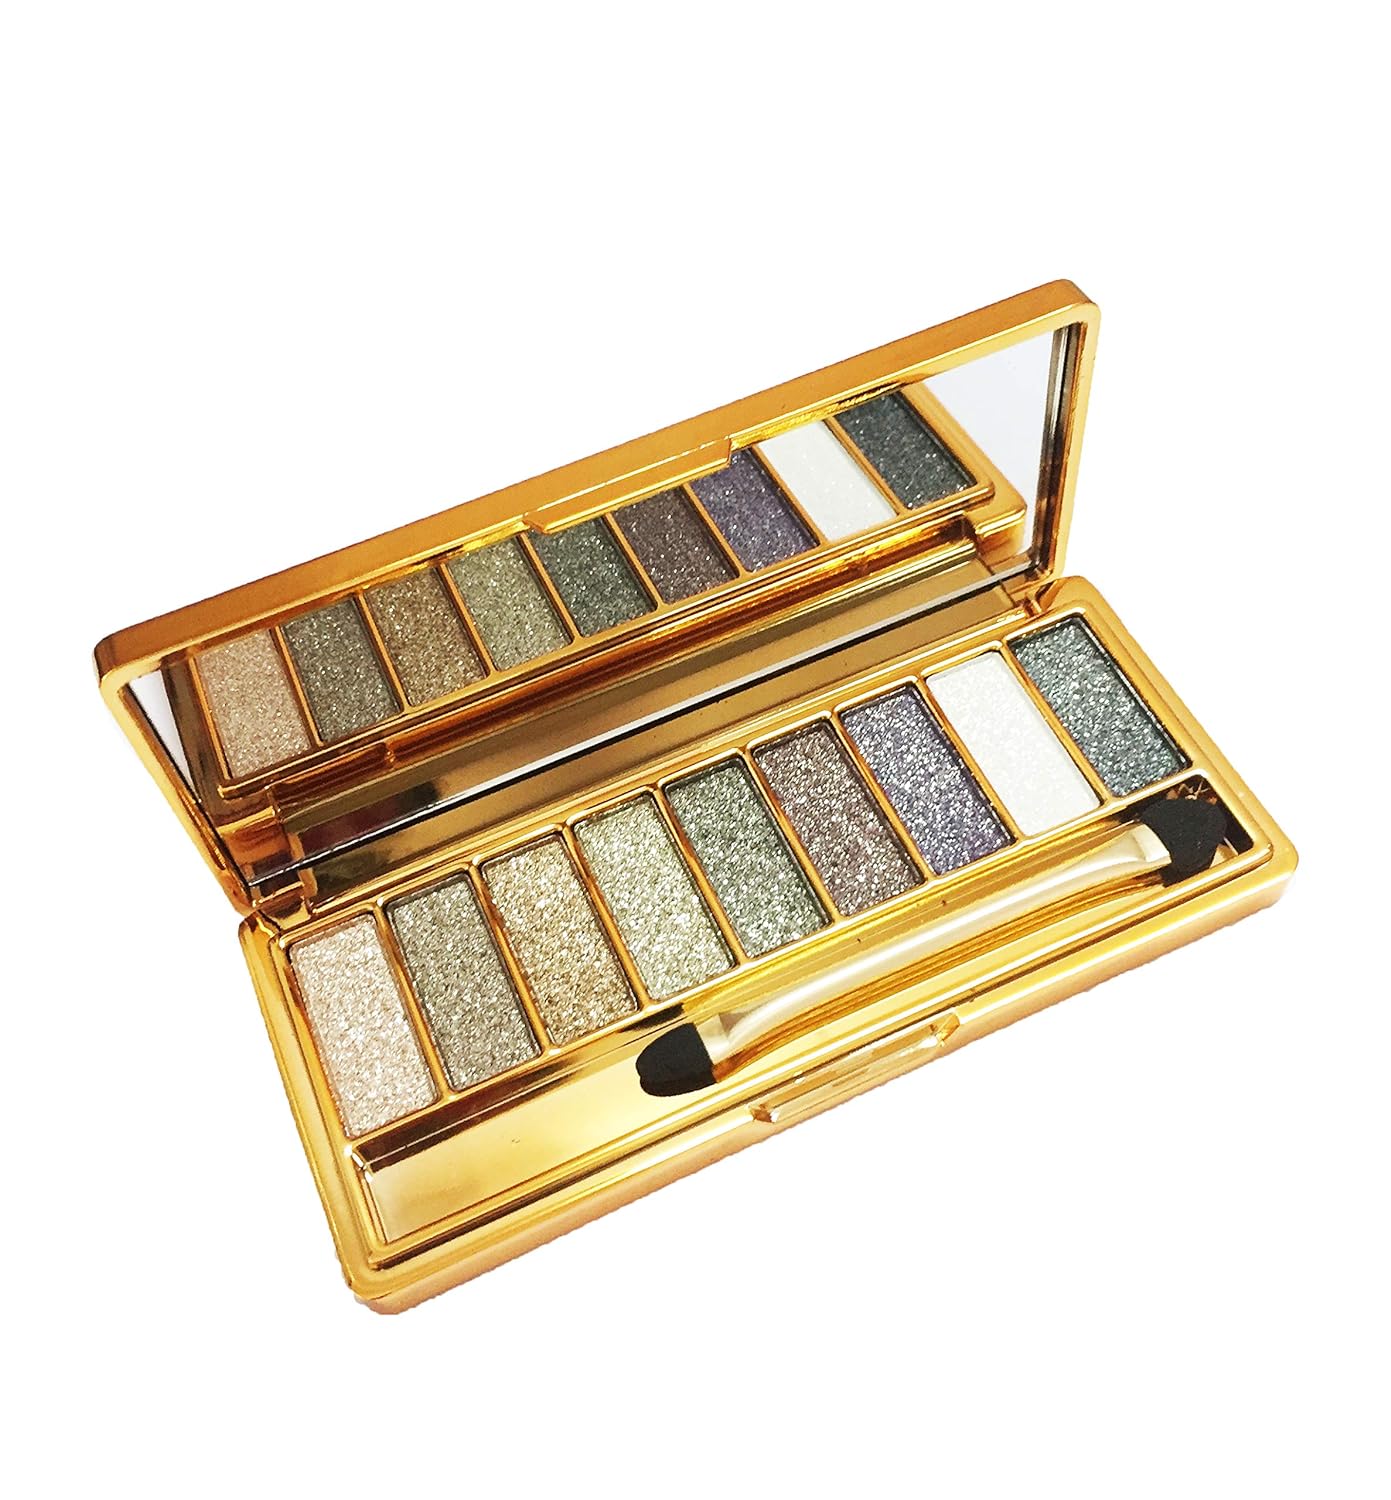  UIFCB Glitter Eyeshadow Palette,9 Colors Sparkle Shimmer Eye Shadow Highly Pigmented Long Lasting Makeup Set Gold (Type 3)